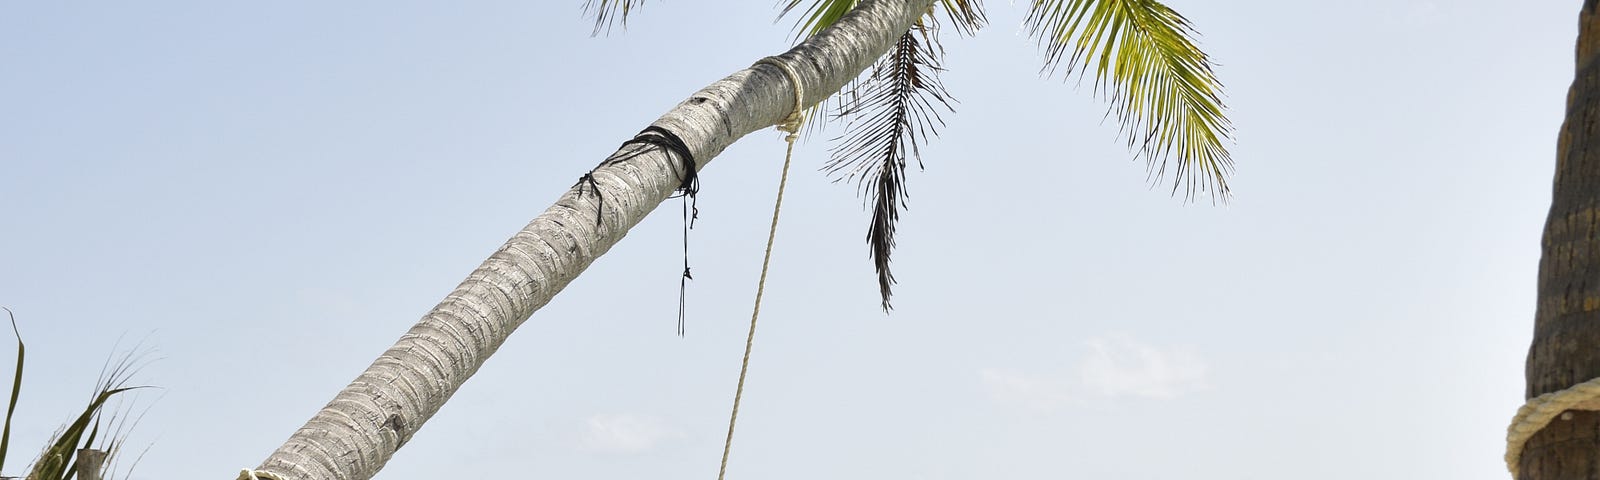 An image of a roped hammock between two palm trees with a light blue ocean in the background.